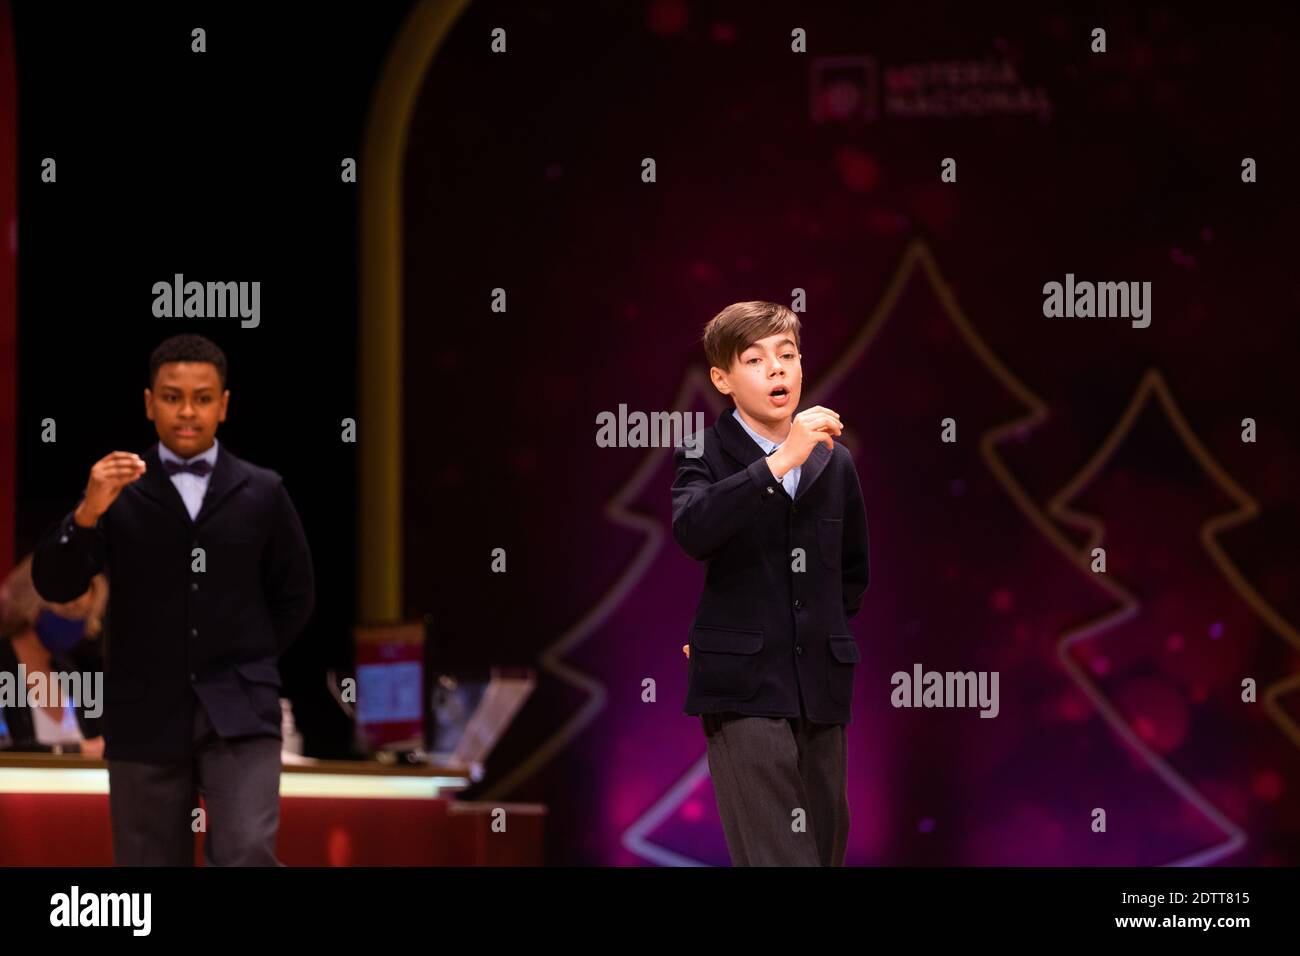 Madrid, Spain. 22 December, 2020: Pupils of the San Ildefonso school, hold the ball bearing of the fourth prize number during the draw of Spain's Christmas lottery named 'El Gordo' (Fat One) at the Teatro Real on December 22, 2020 in Madrid, Spain. The fourth prize number is 52472, with a total of 200.000 euros for the prize to be shared between ten ticket holders. Credit: Jon Imanol Reino/Alfa Images/Alamy Live News Stock Photo